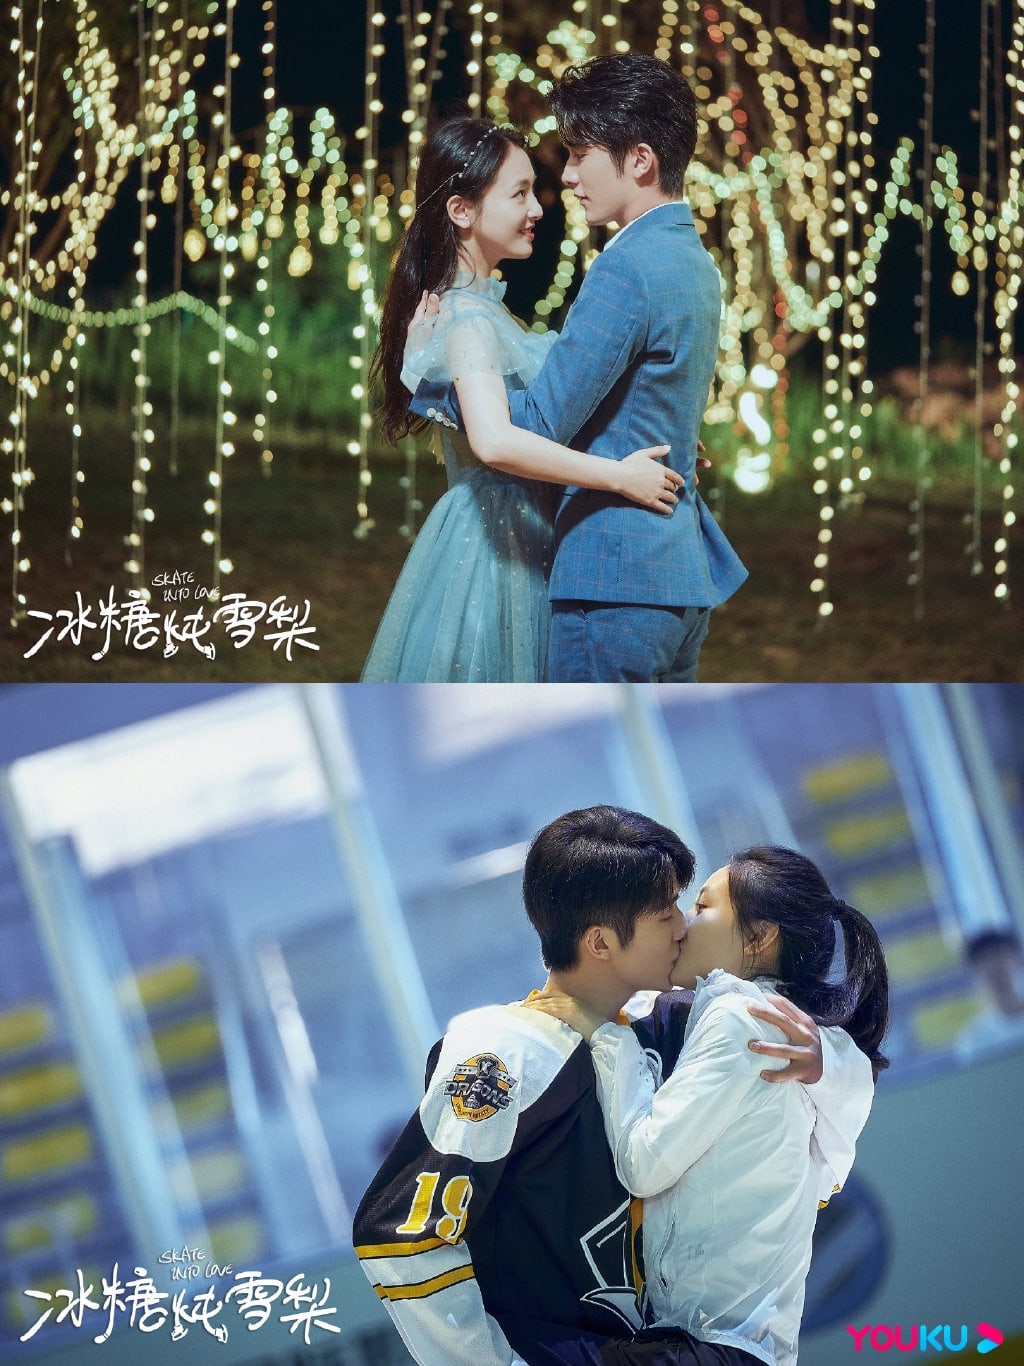 Celebration Of Love: 5 C Drama & TW Drama Pairings That Are Truly Relationship Goals